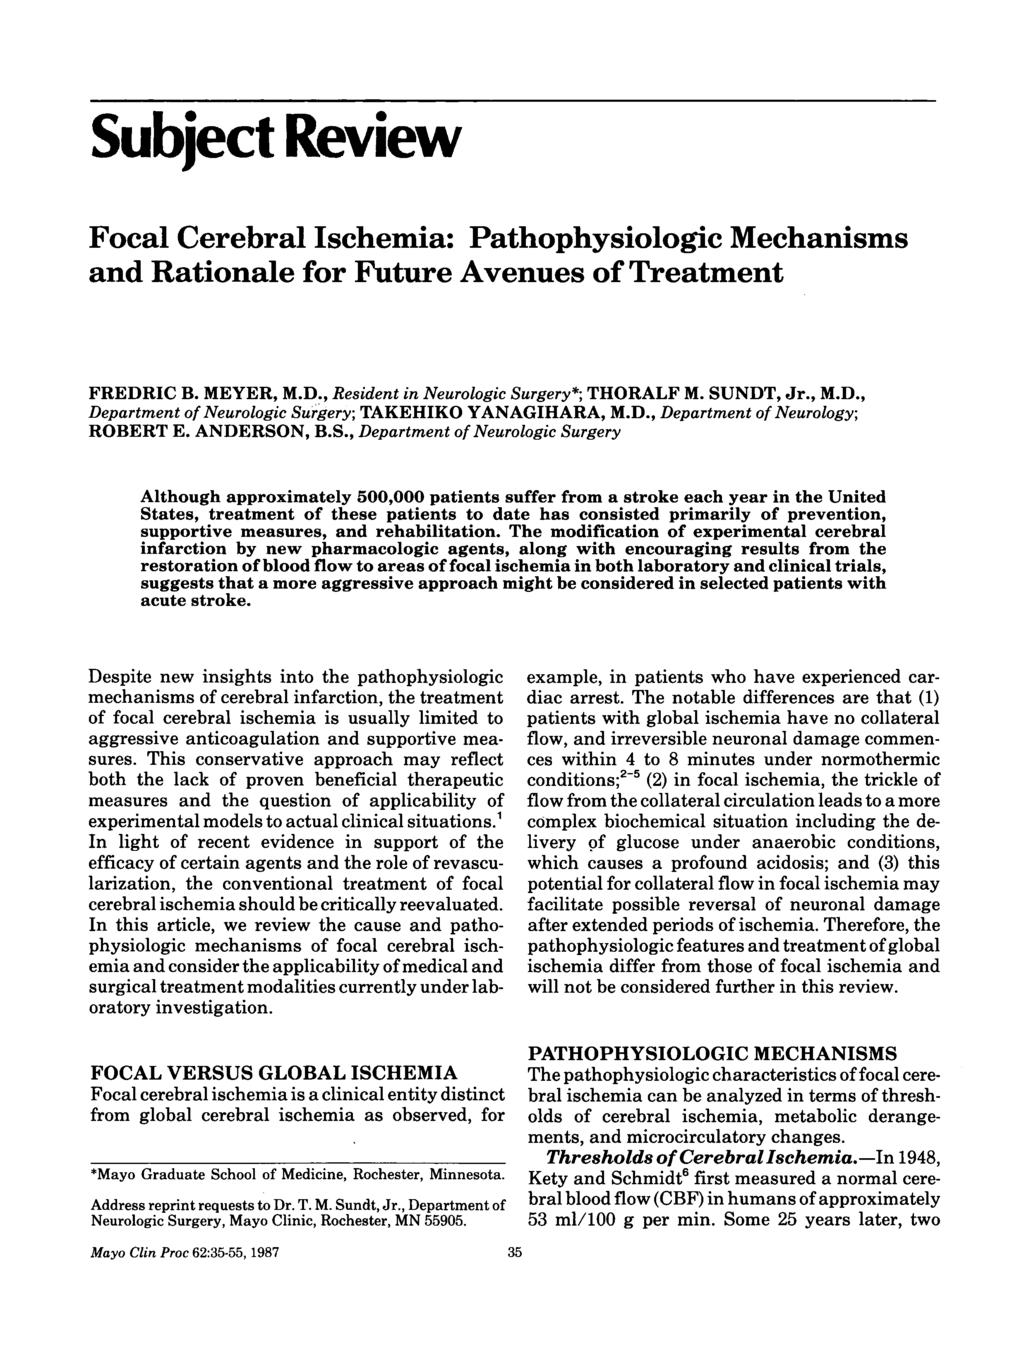 Subject Review Focal Cerebral Ischemia: Pathophysiologic Mechanisms and Rationale for Future Avenues of Treatment FREDRIC B. MEYER, M.D., Resident in Neurologic Surgery*; THORALF M. SUNDT, Jr., M.D., Department of Neurologic Surgery; TAKEHIKO YANAGIHARA, M.